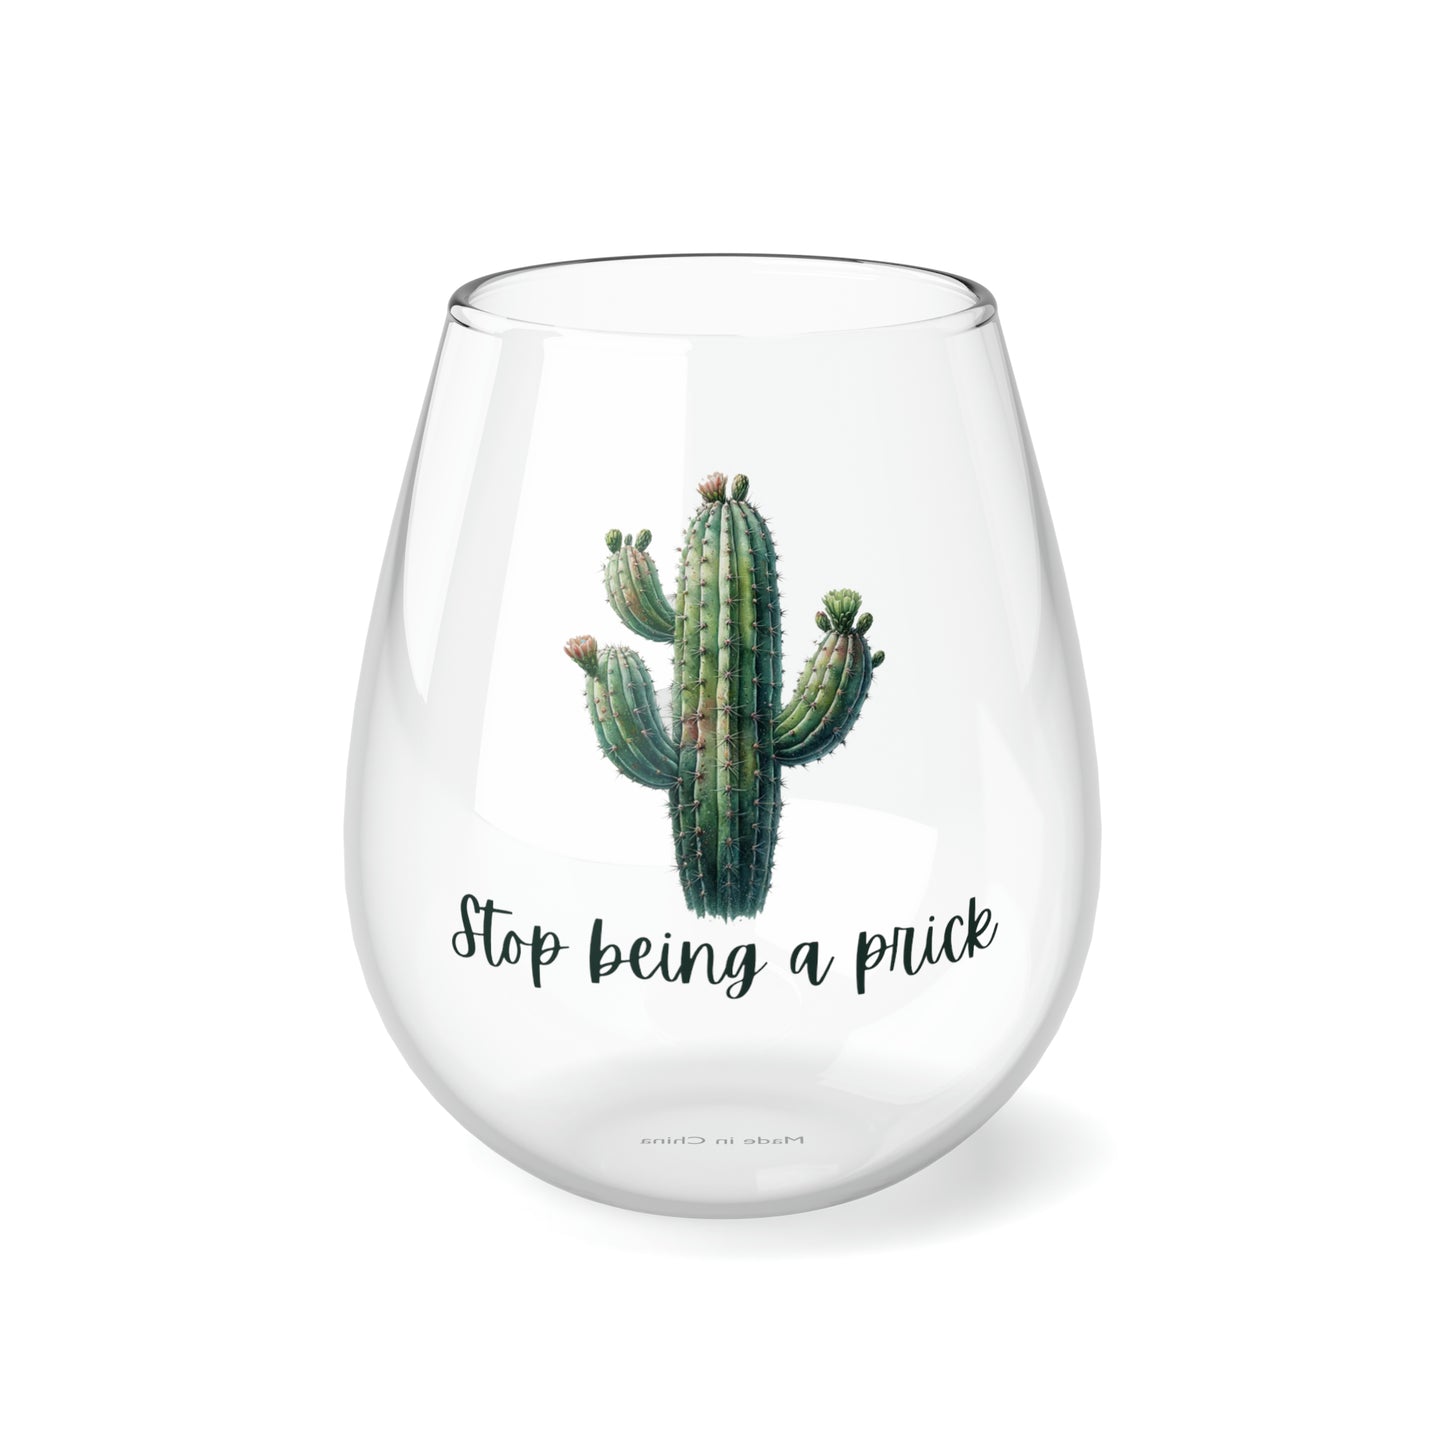 Stop being a prick, Stemless Wine Glass, 11.75oz